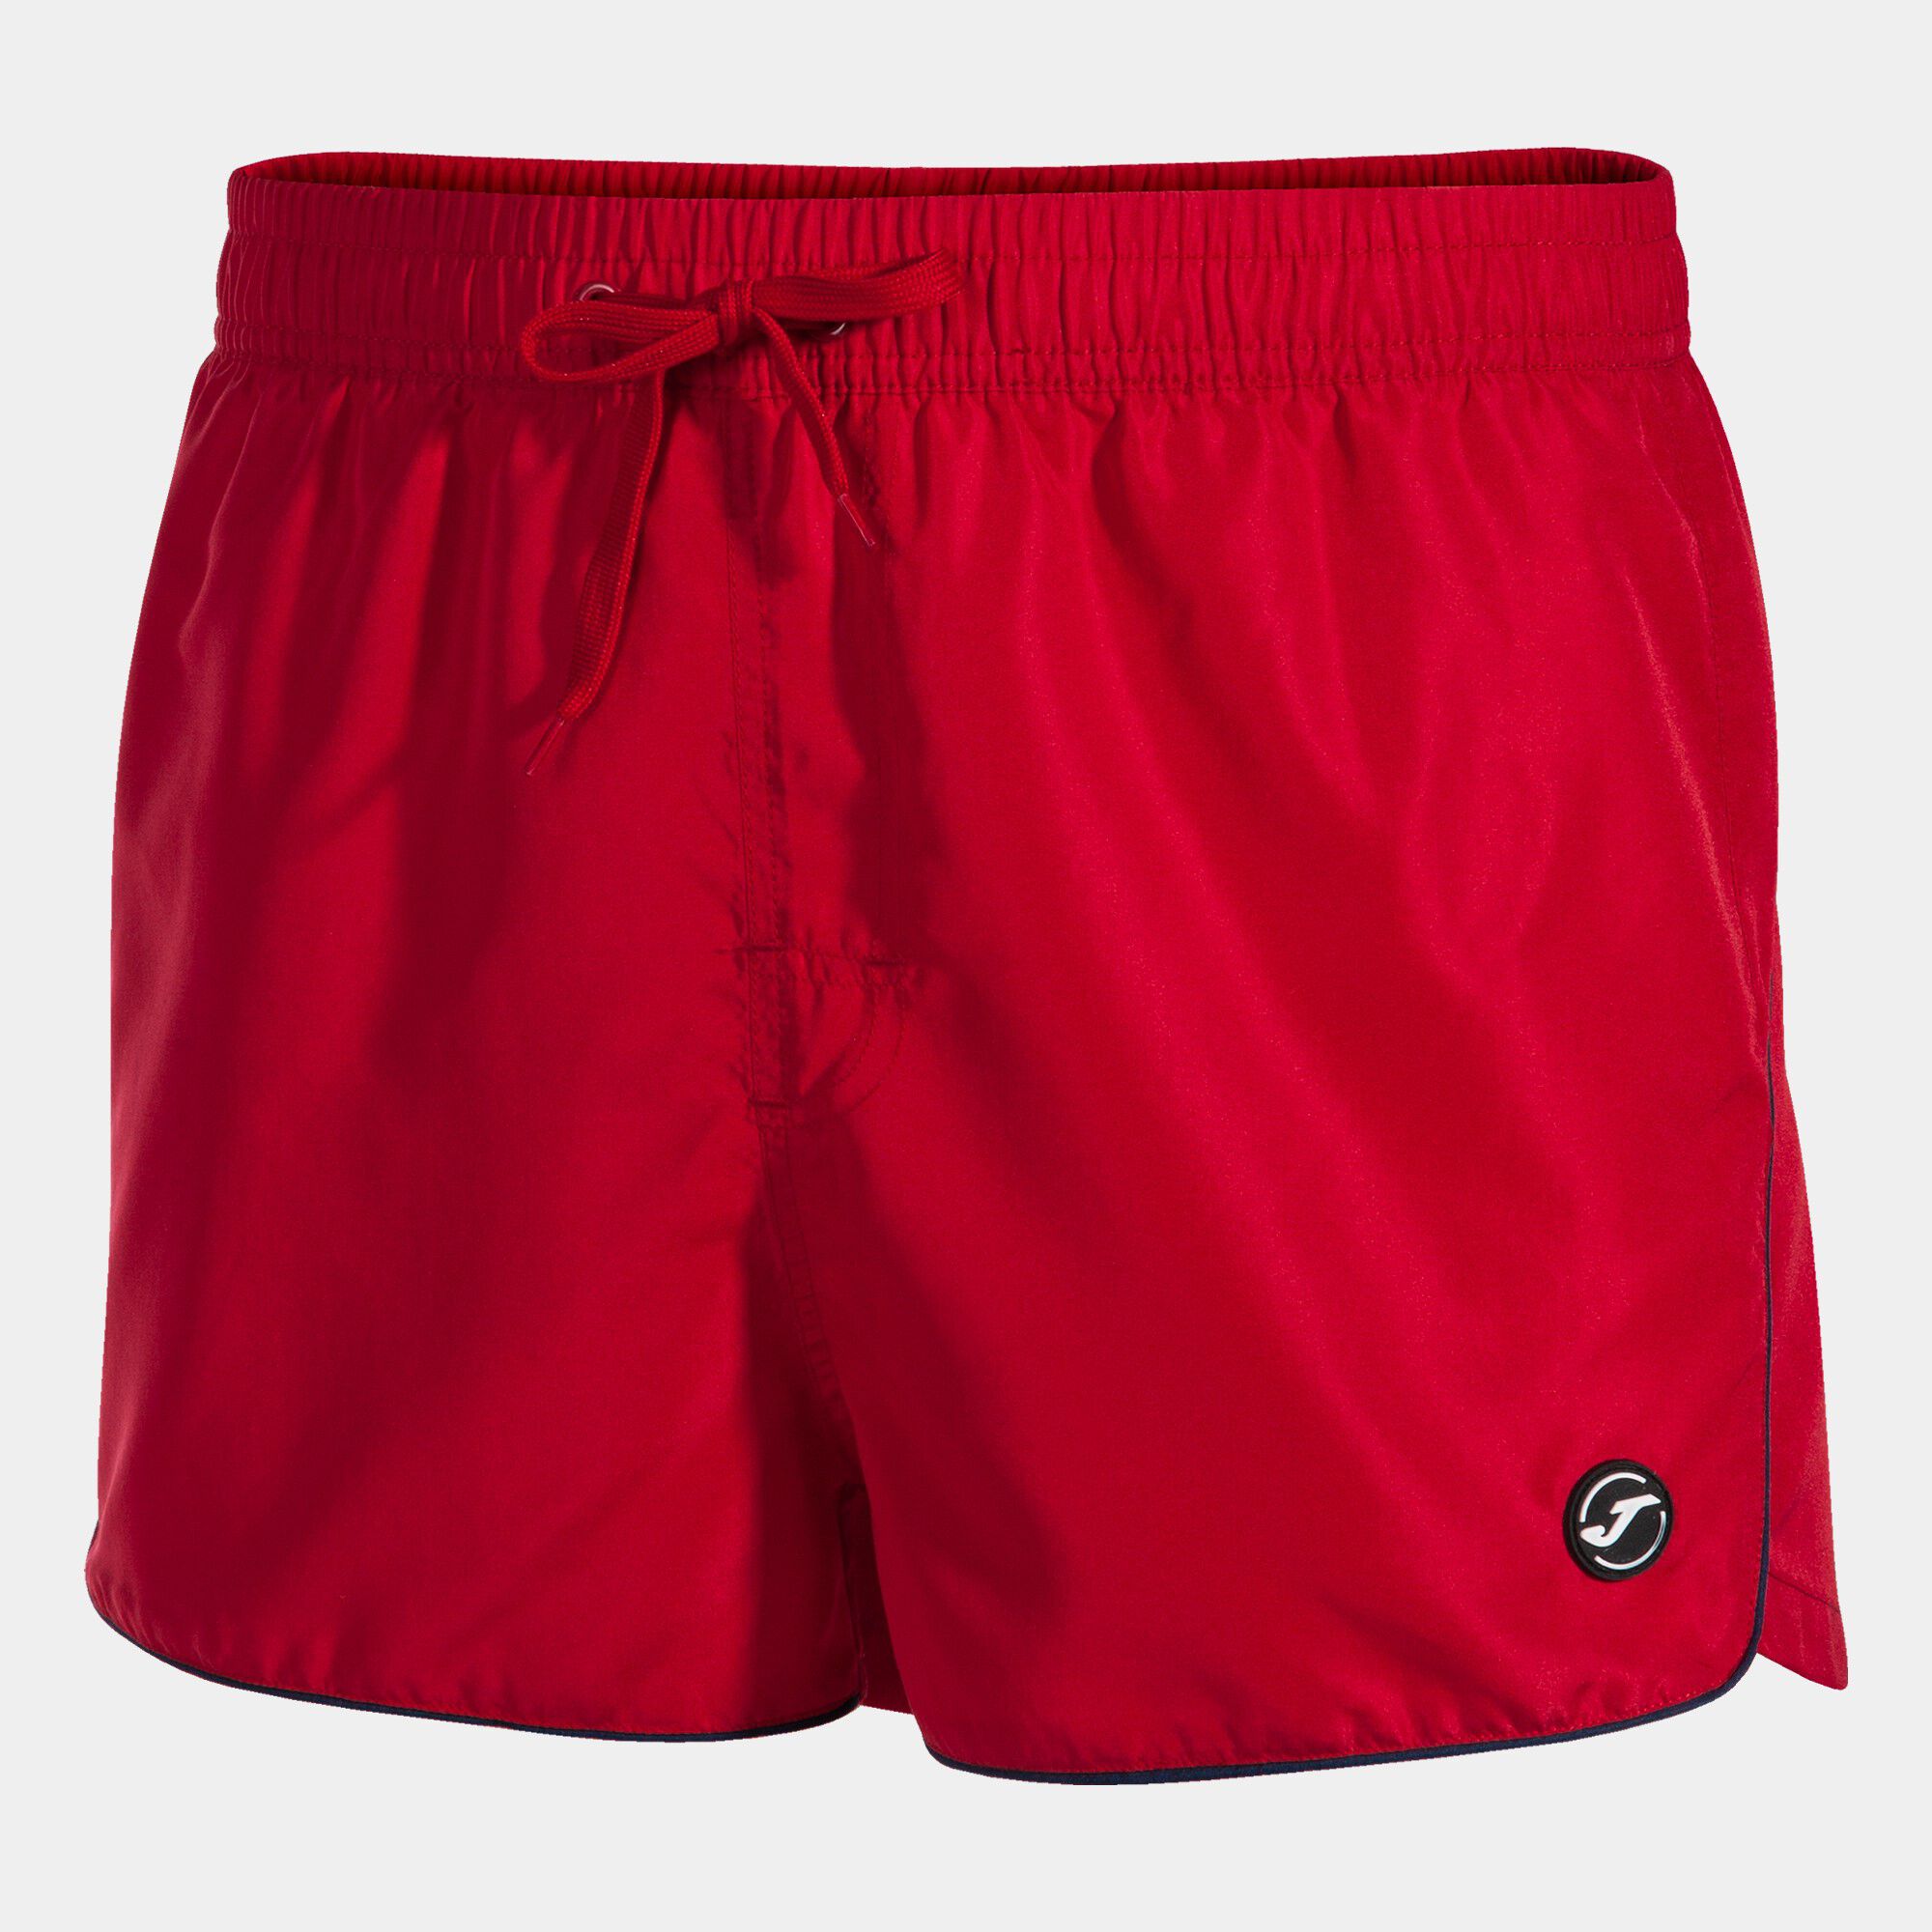 Swimming trunks man Curve red